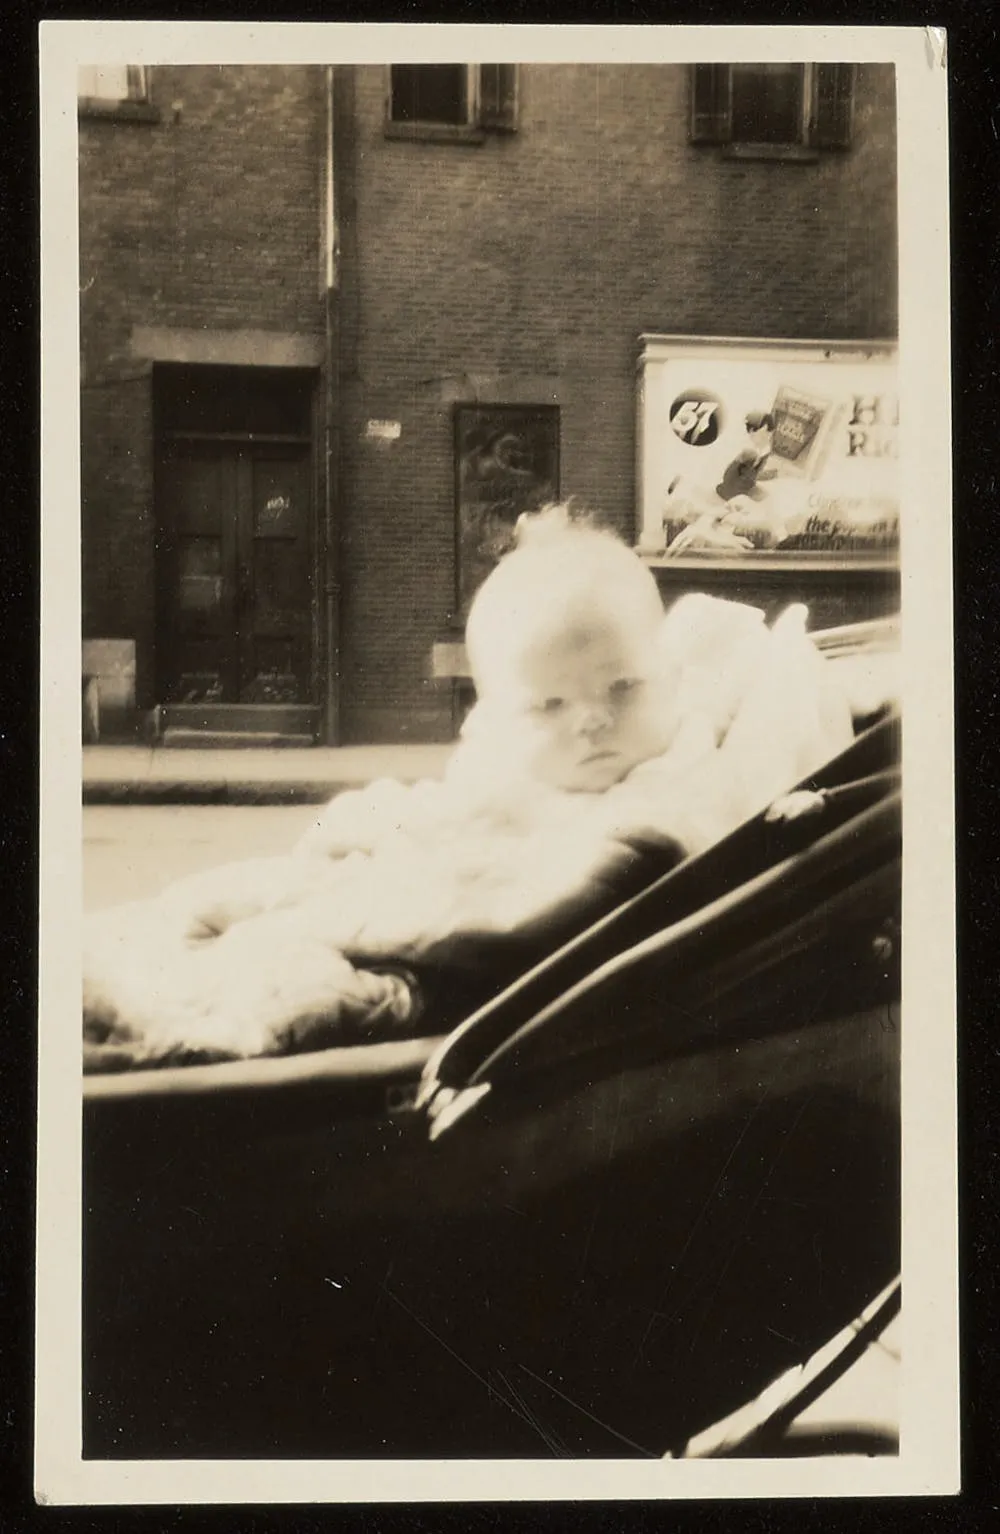 Roger Courtney’s infant son, Horace Sears Courtney, sits in a stroller.